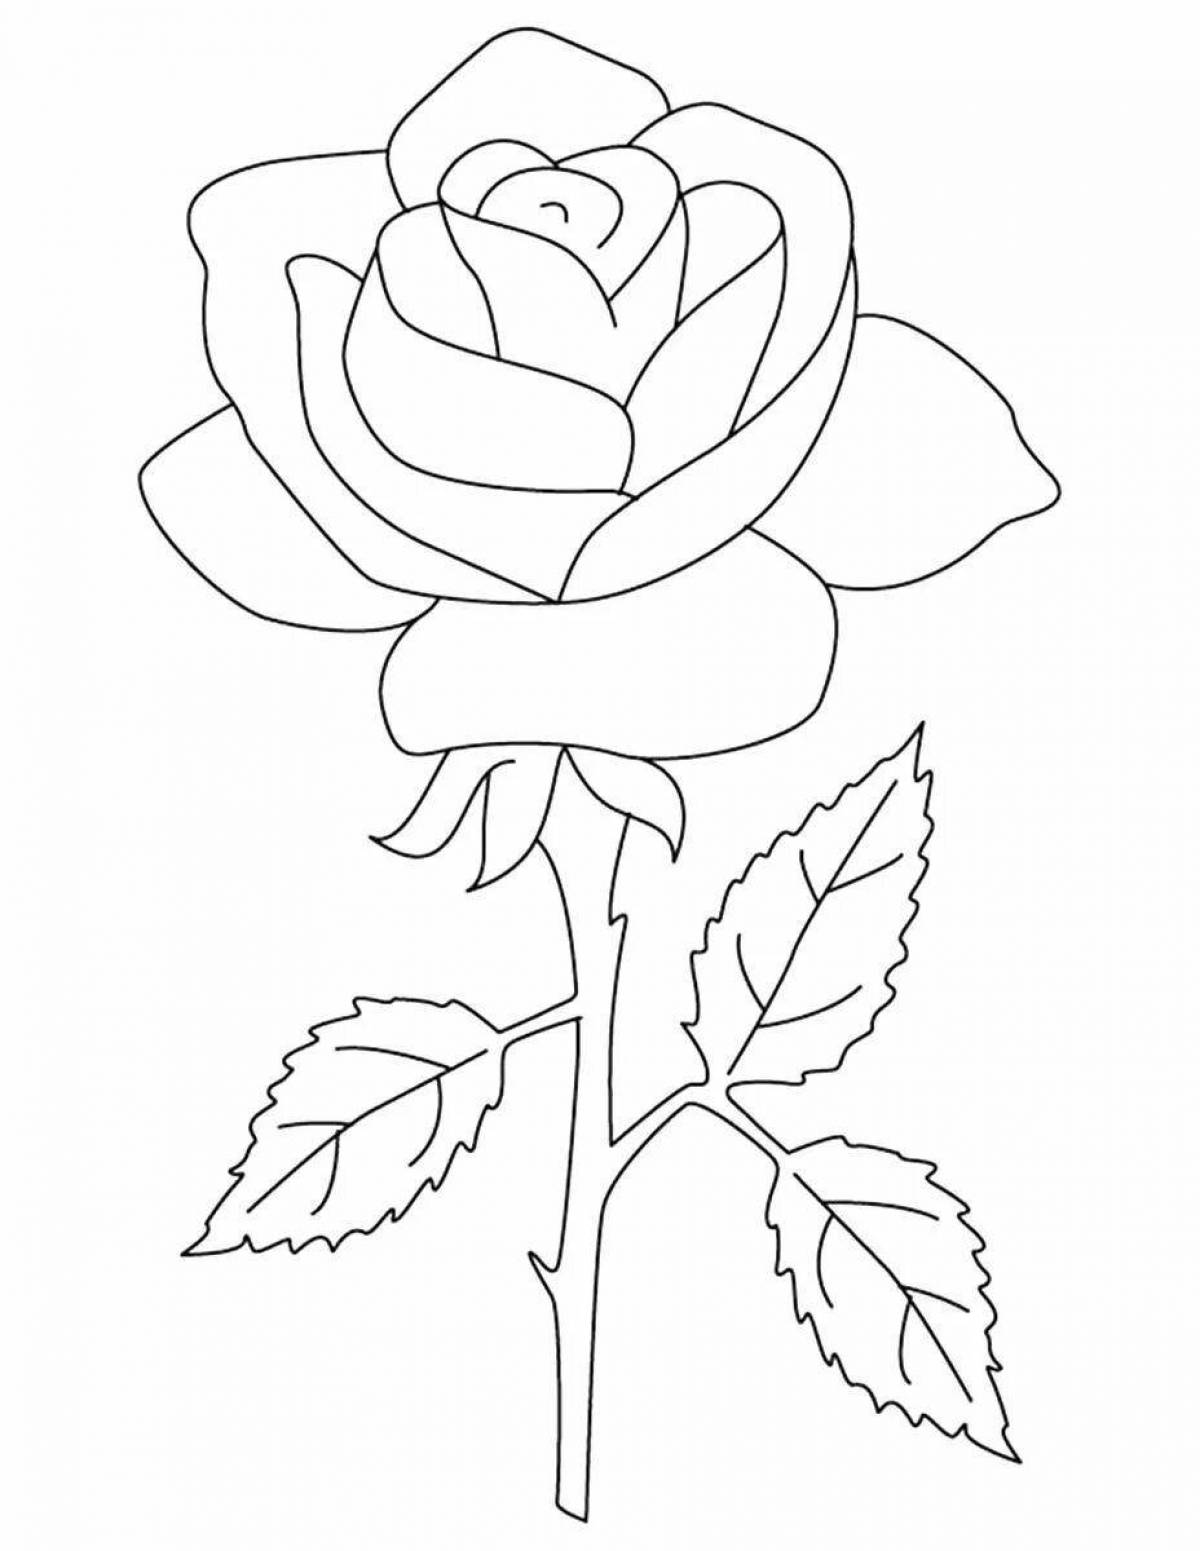 Colourful rose coloring book for children 5-6 years old